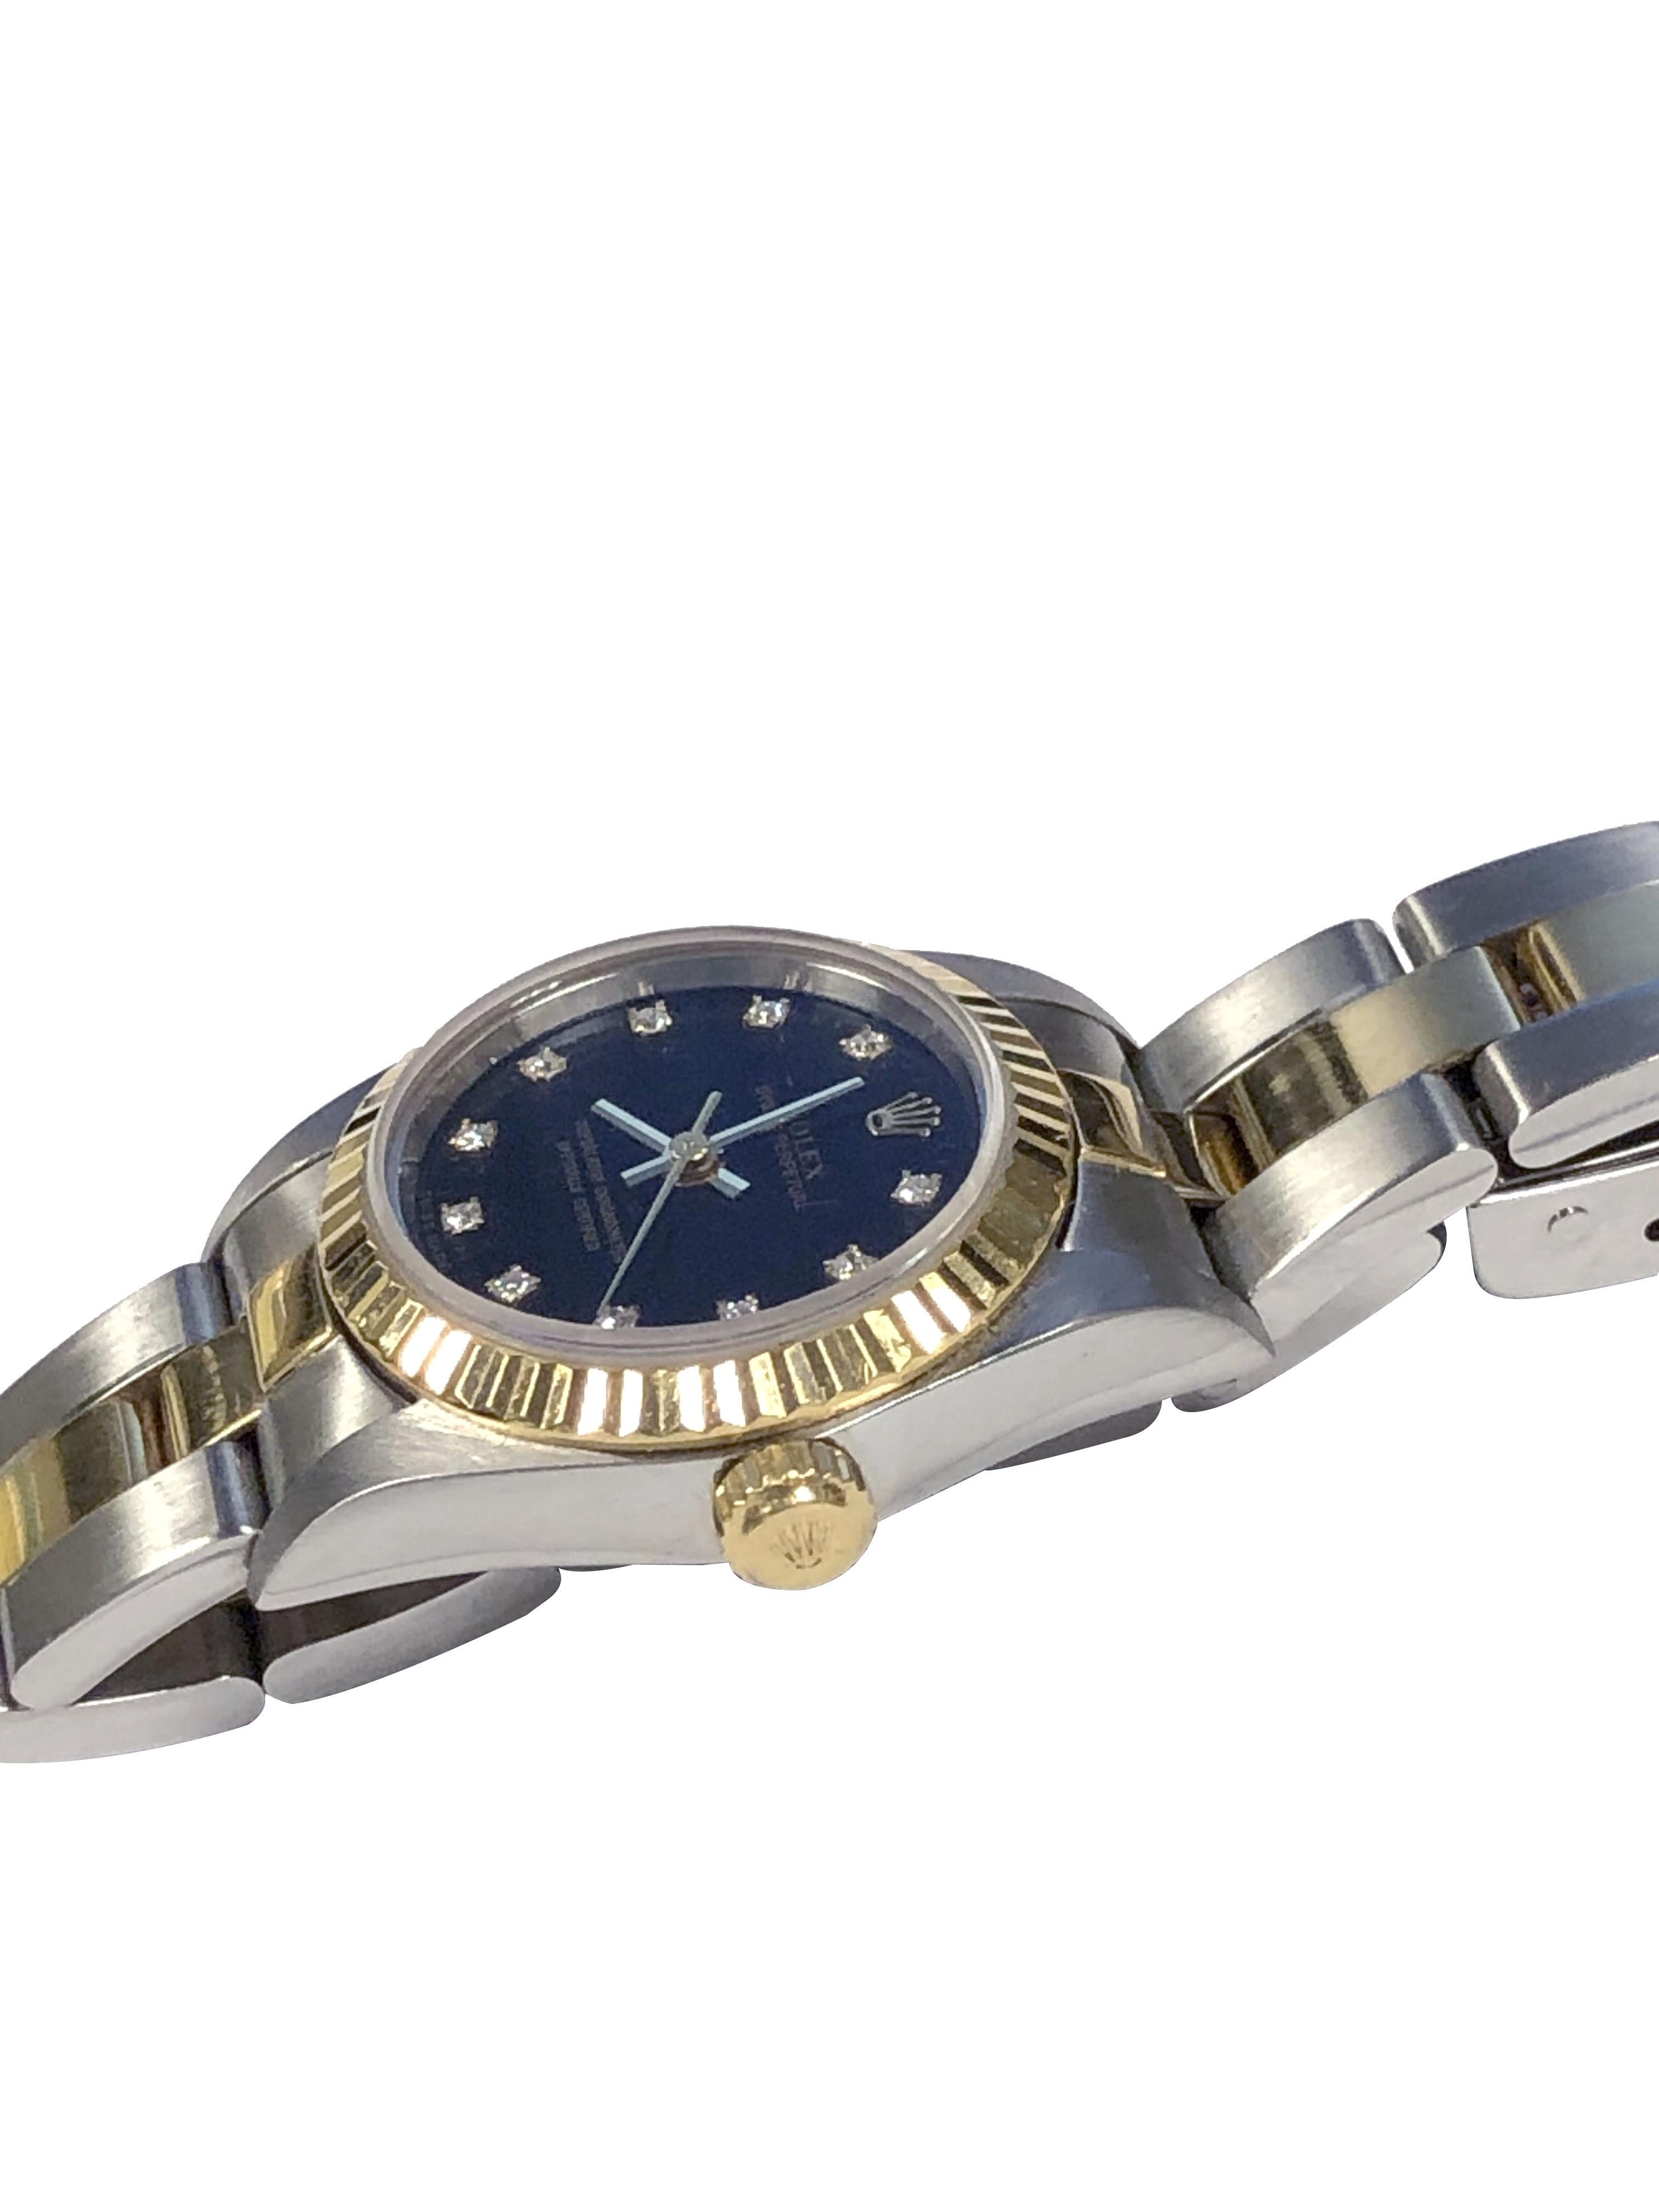 Circa 1999 Rolex Ladies Reference 76193 Wrist Watch, 24 M.M. 3 Piece Stainless Steel Oyster Case with 18k Yellow Gold Fluted bezel. Caliber 2230 Automatic, self winding movement, Black Dial with Diamond set Markers, Sapphire Glass Crystal. Steel and